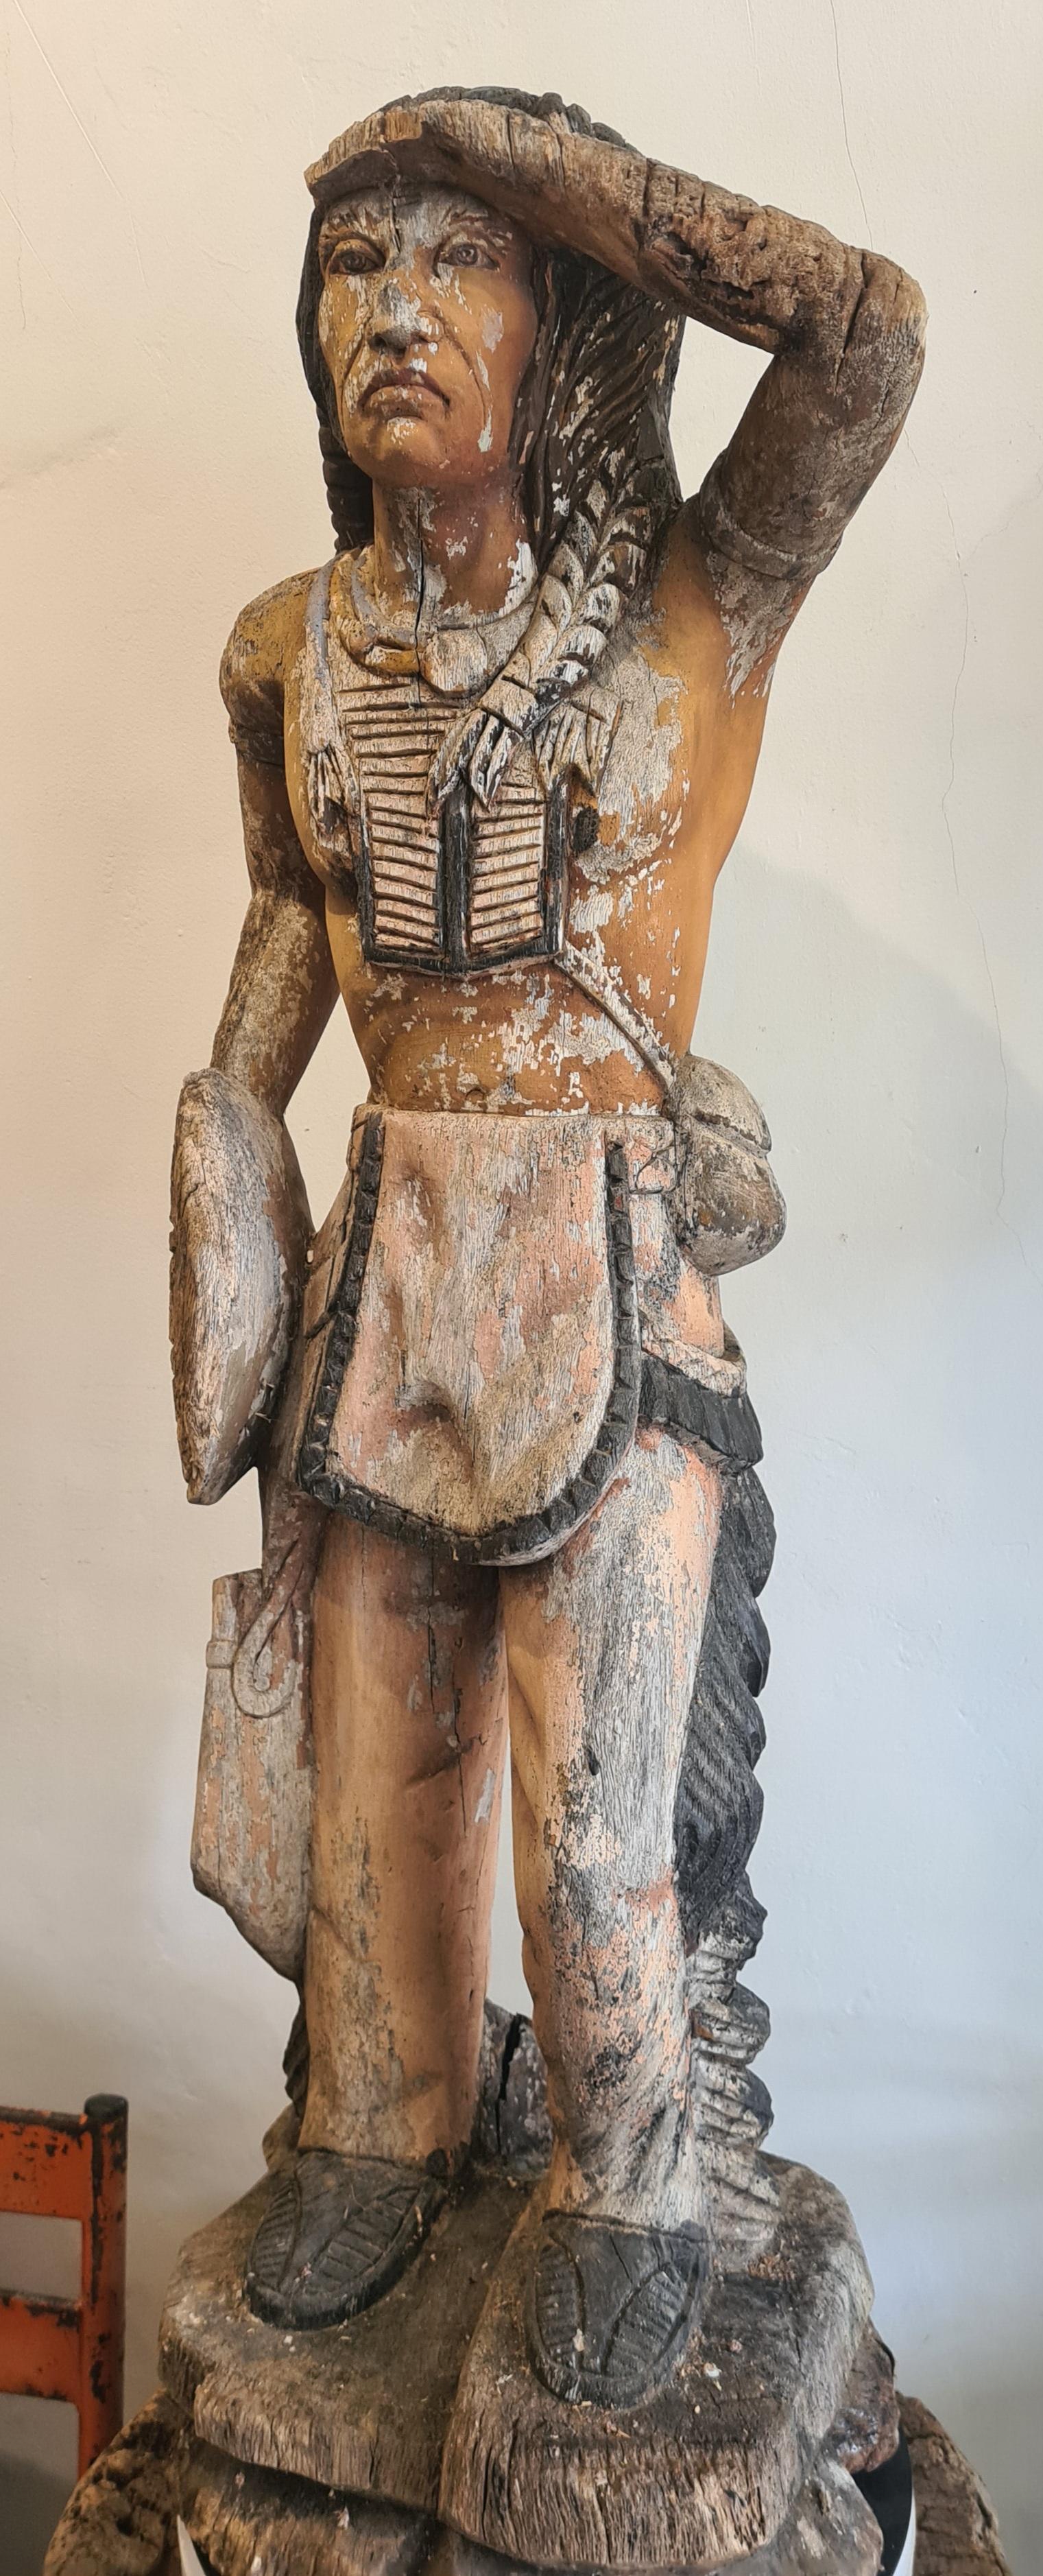 Samuel Robb Figurative Sculpture - An Early 20th Century Cigar Store Indian, Carved Wood With Polychrome Decoration